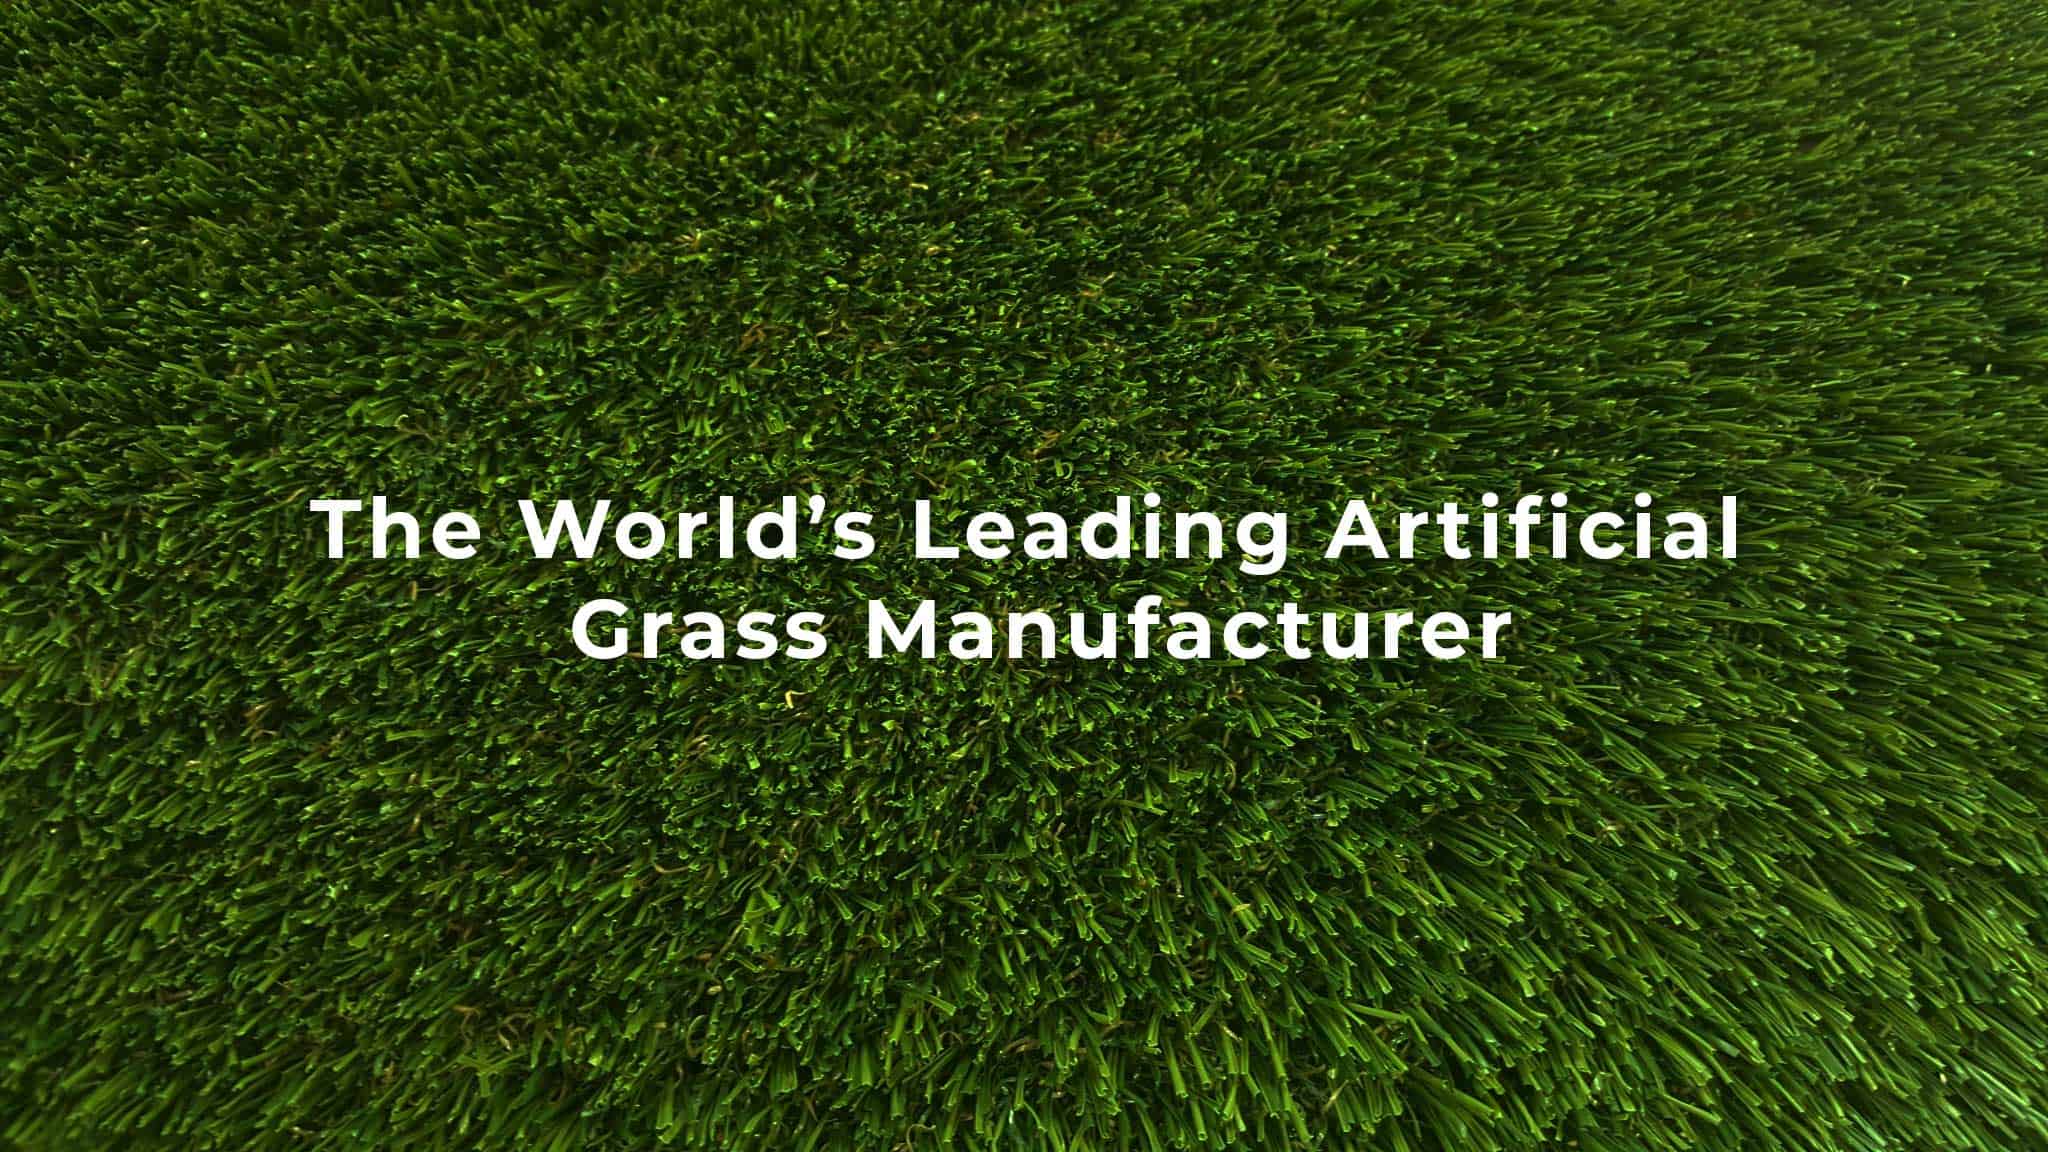 The Worlds Leading Artificial Grass Manufacturer